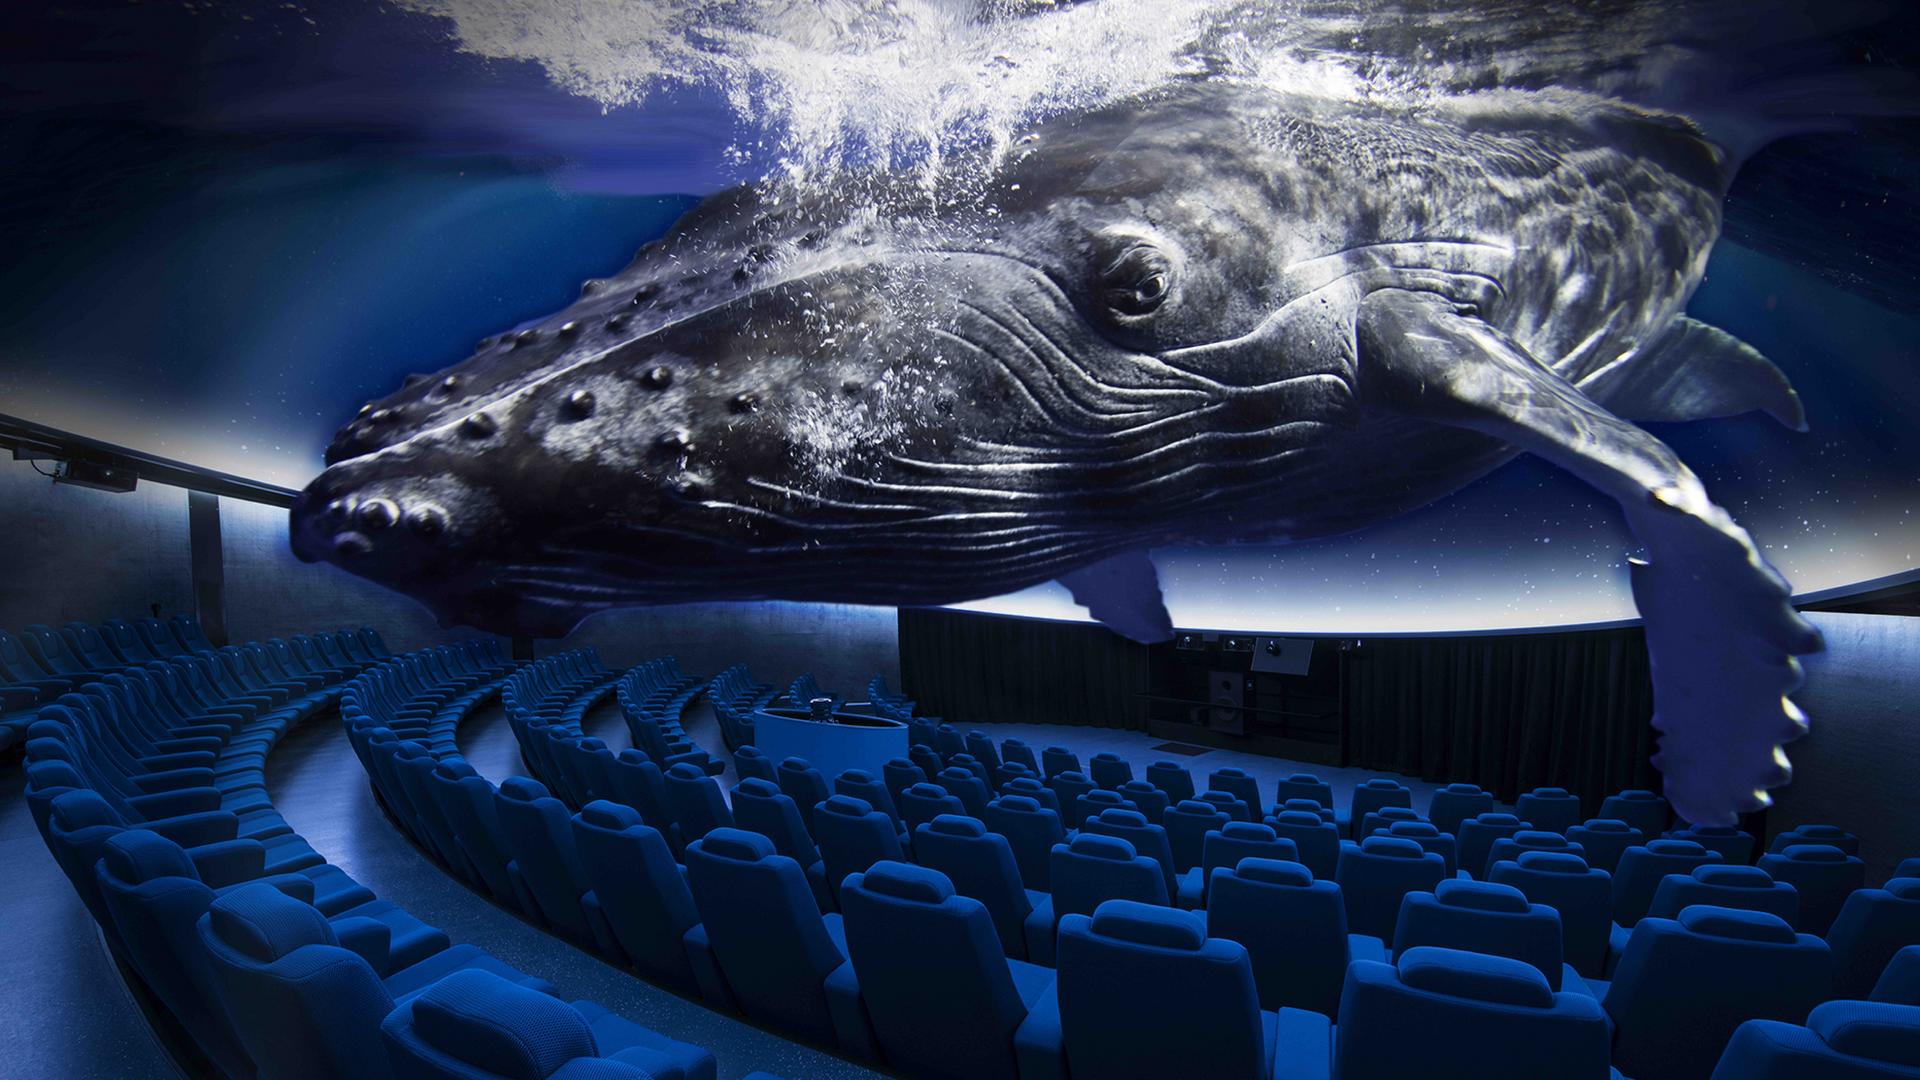 A Rendering of a Humpback Whale in the Theater.